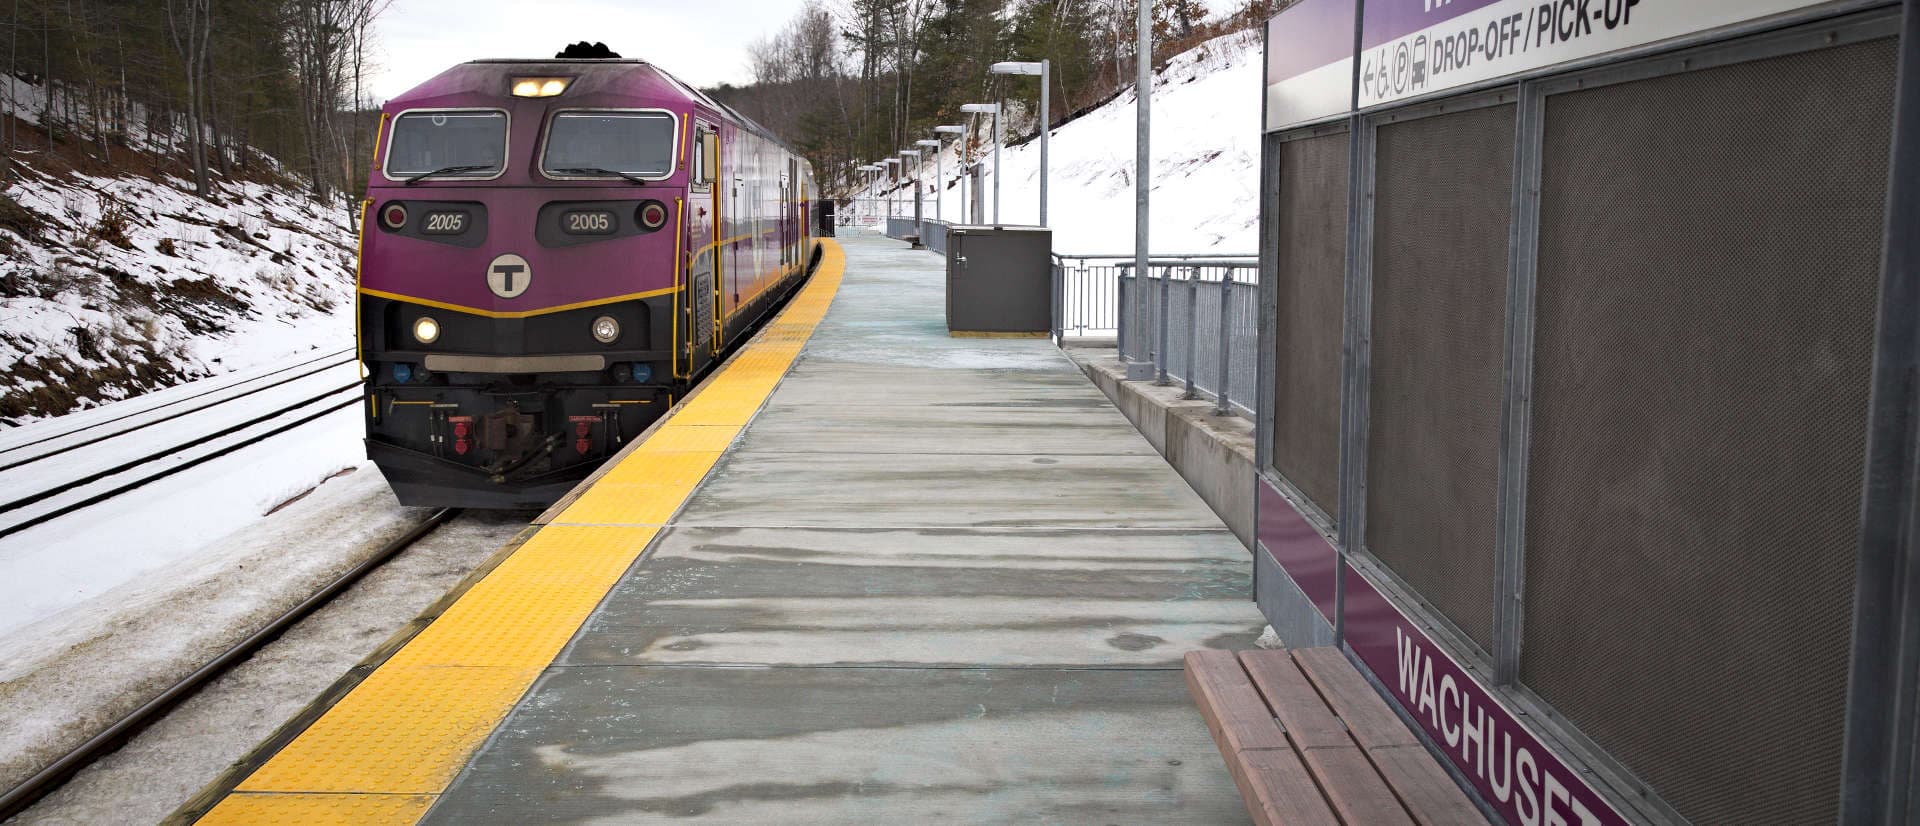 A commuter rail train is shown at the Wachusett station. (Courtesy of MBTA)